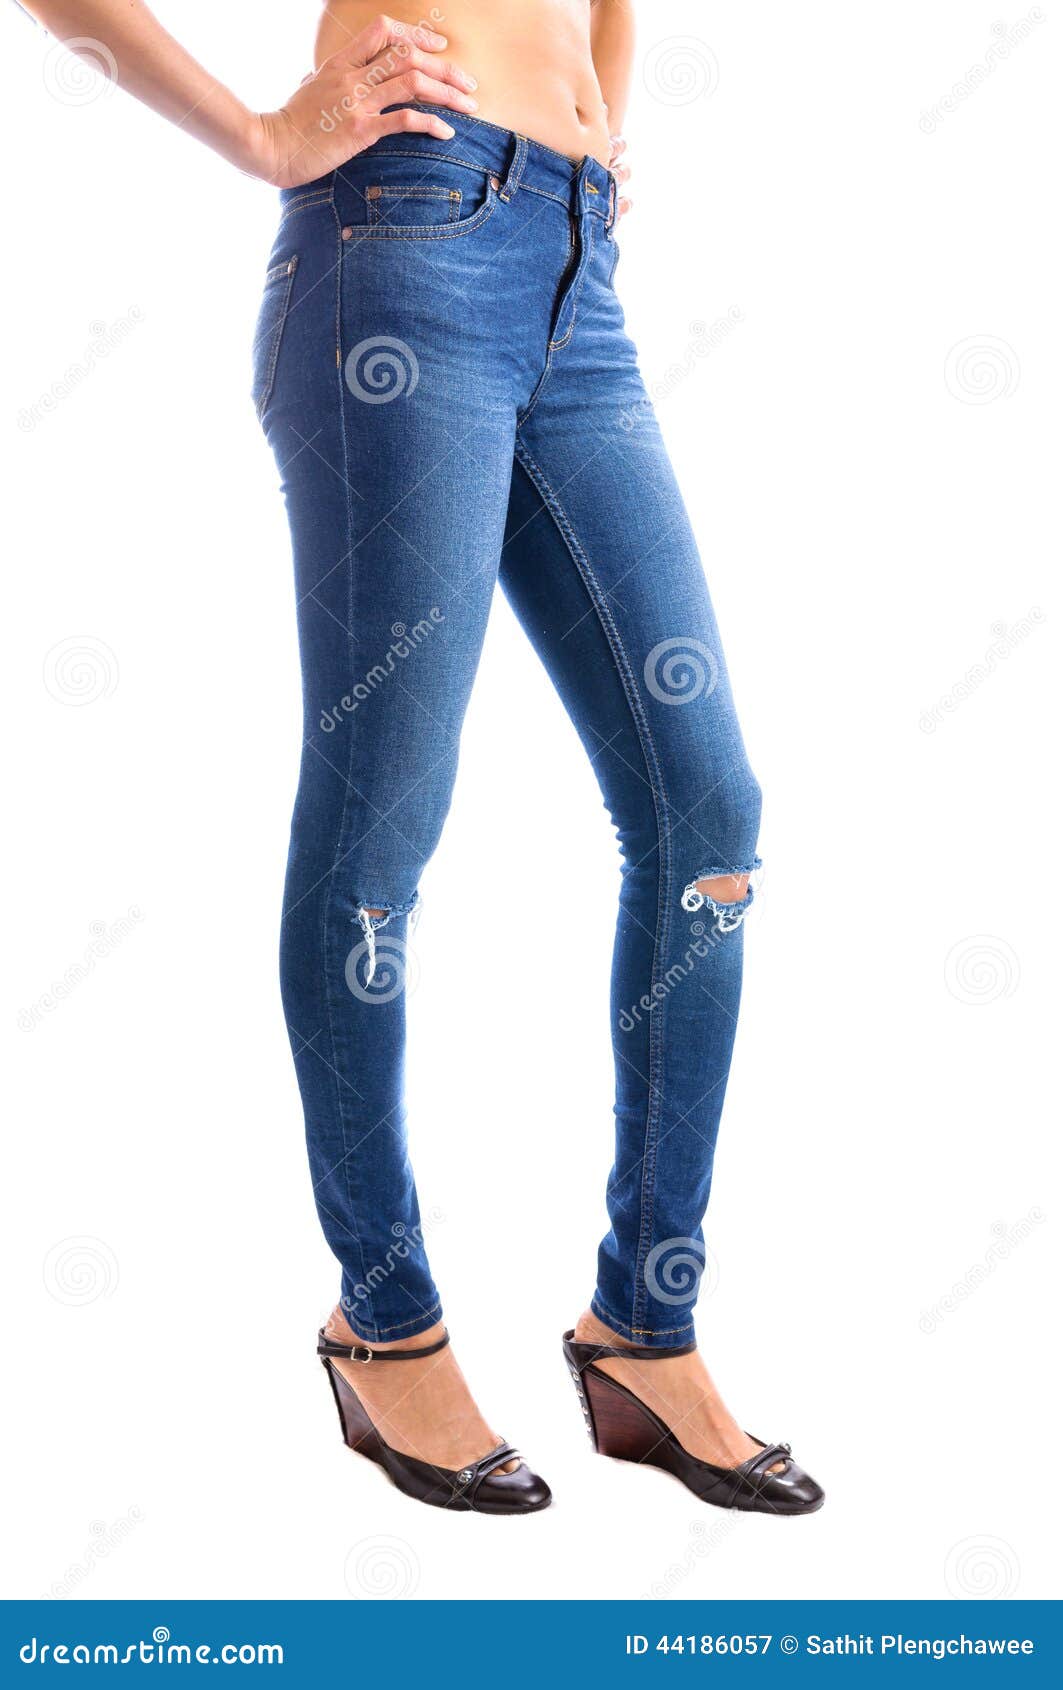 Jeans, Woman Waist Wearing Jeans Stock Image - Image of gorgeous, legs ...